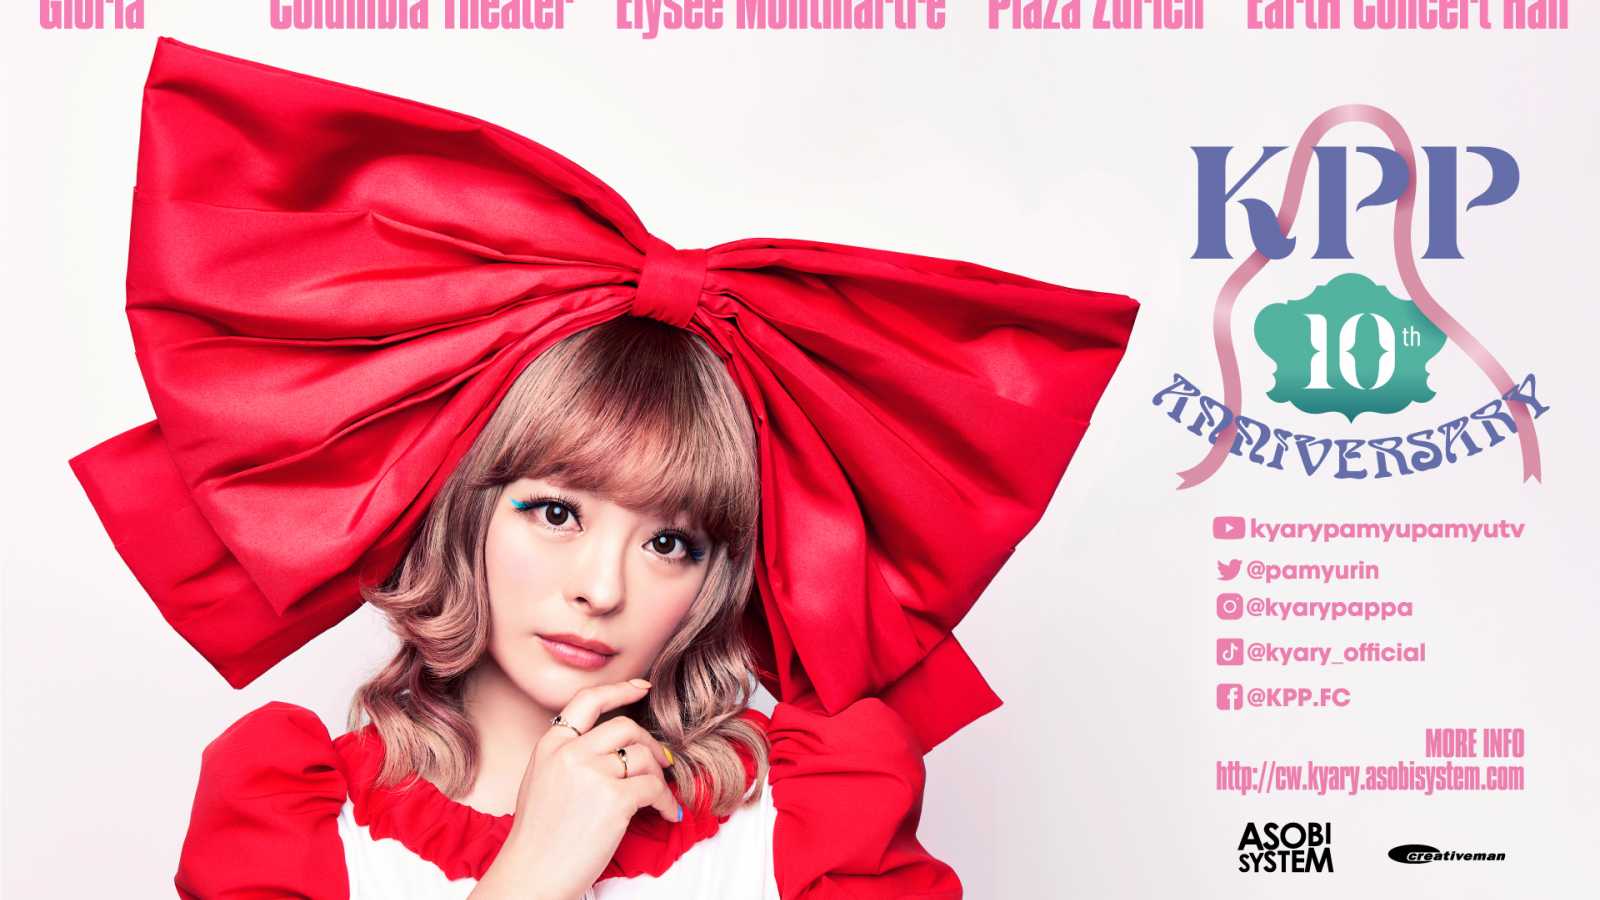 Kyary Pamyu Pamyu in Europa © Kyary Pamyu Pamyu. All rights reserved.